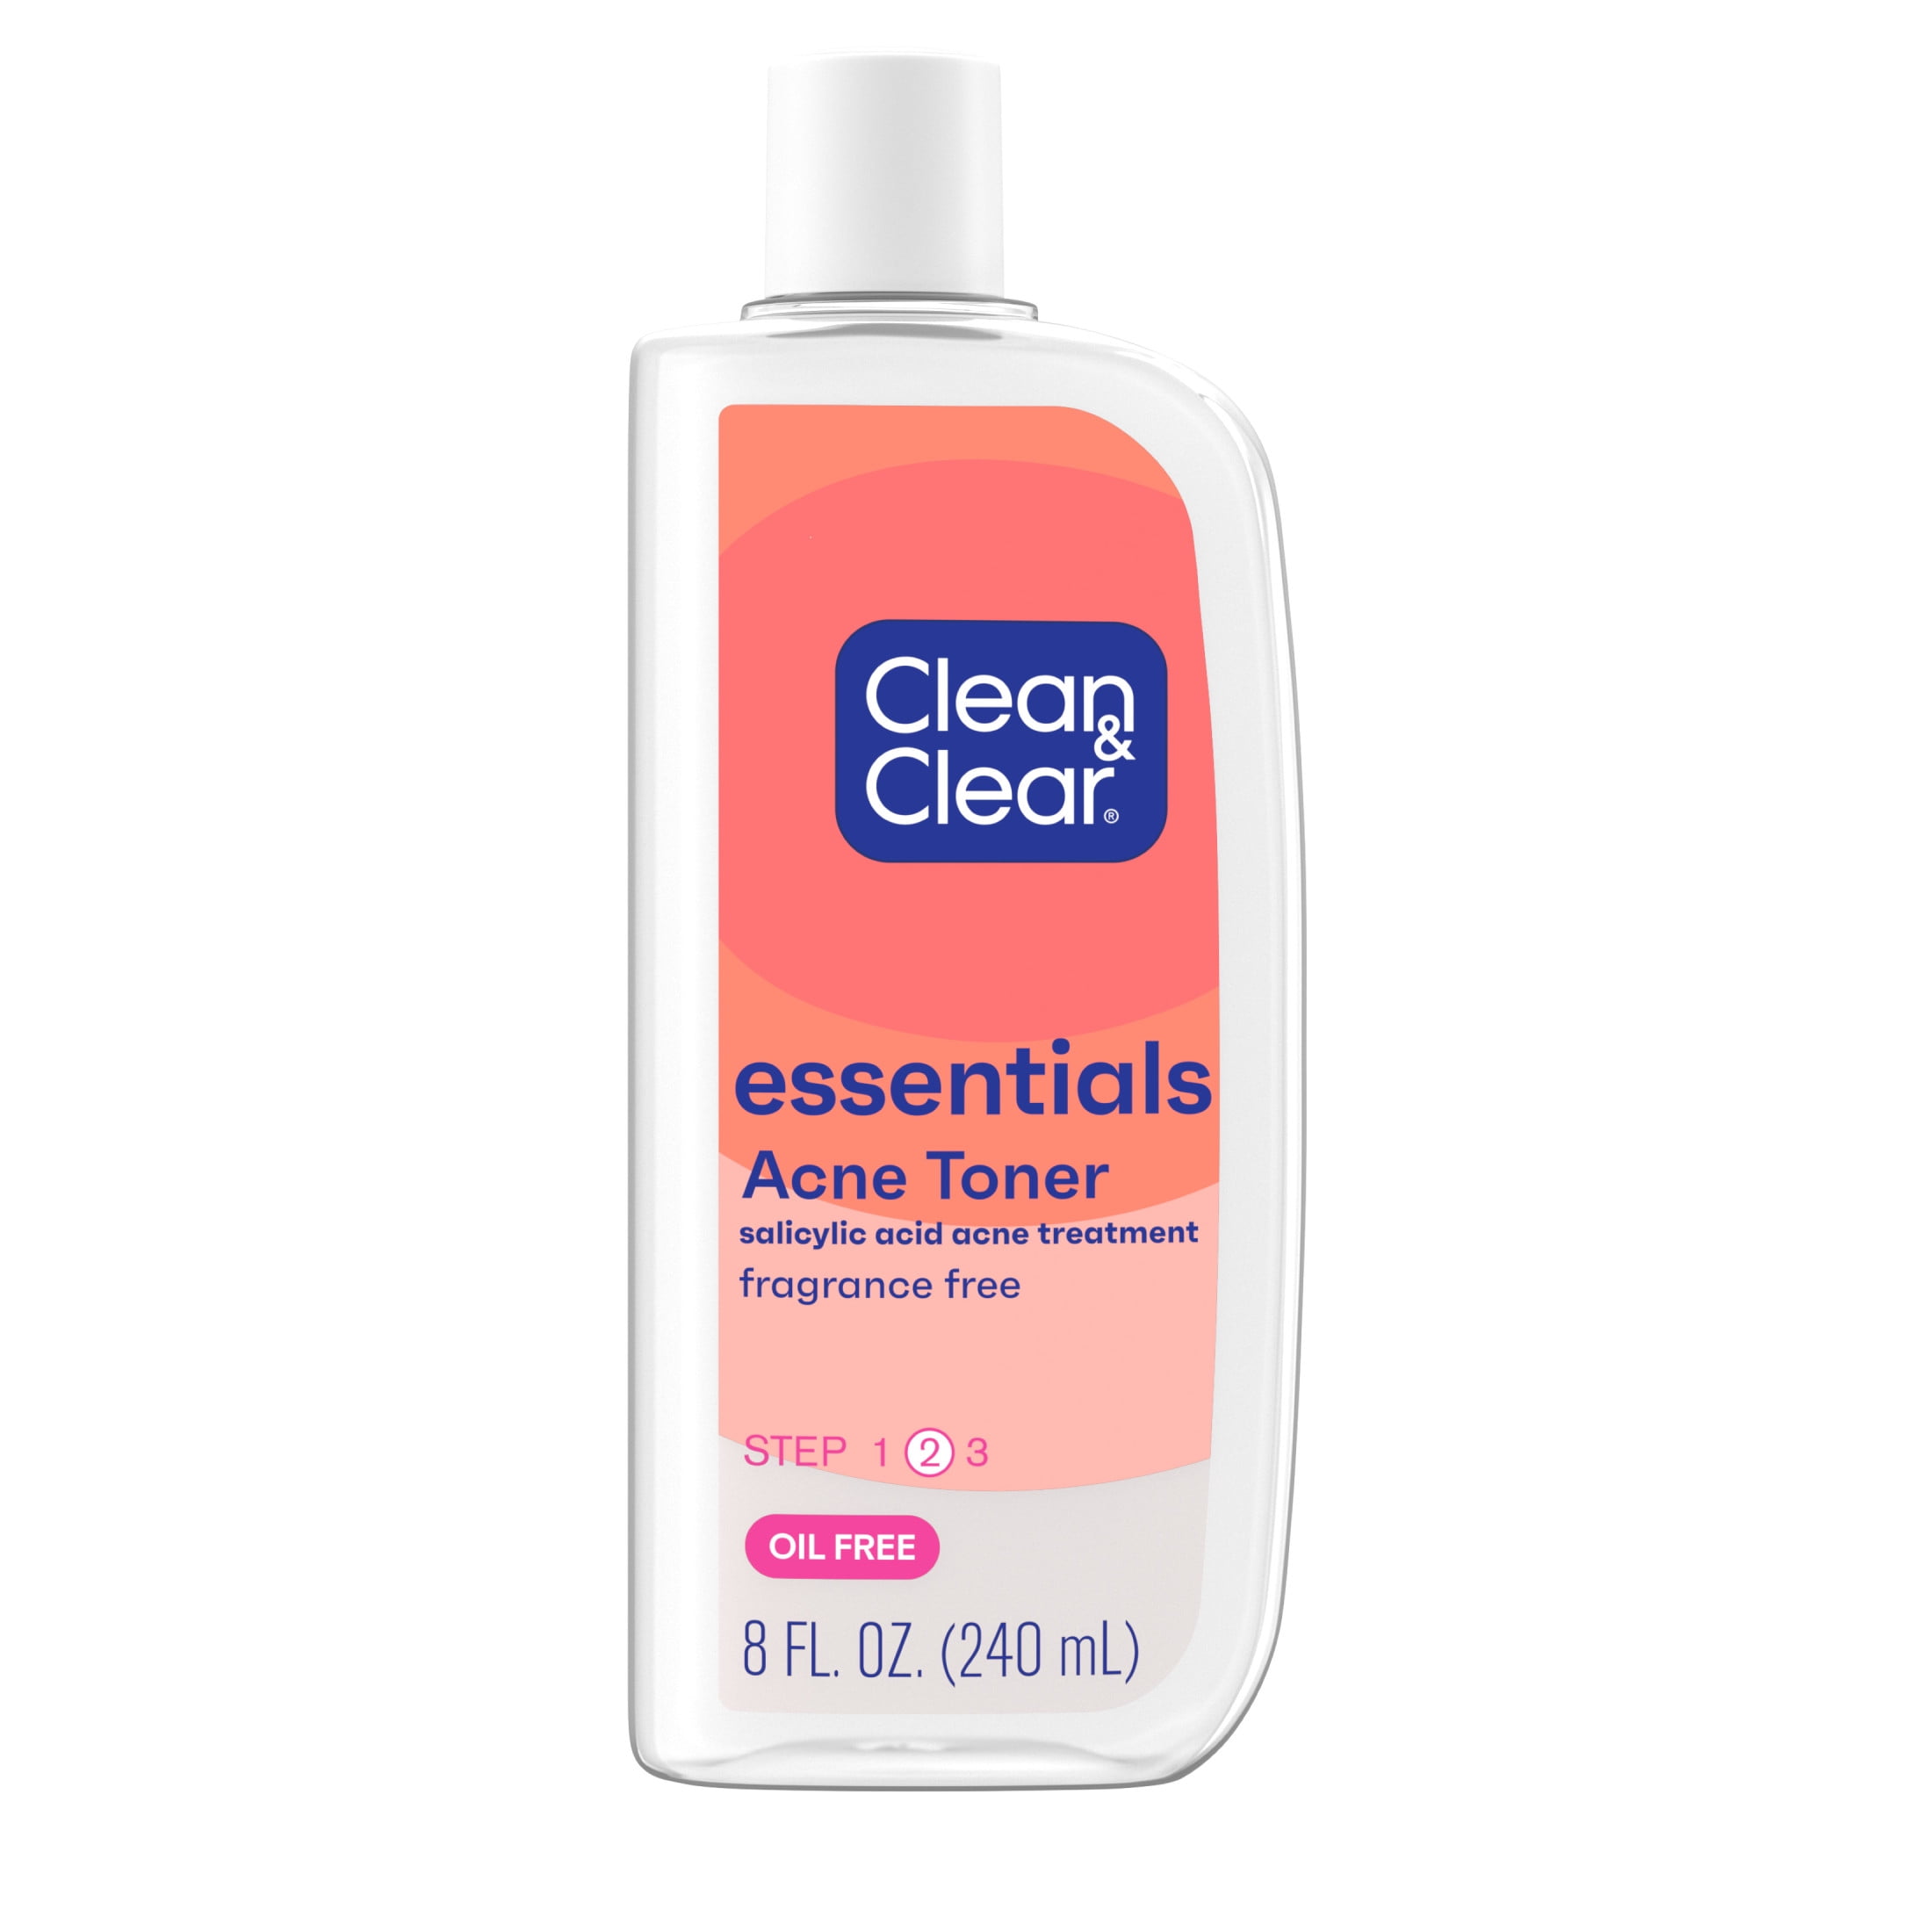 Clean & Clear Essentials Deep Cleaning Astringent (Ingredients